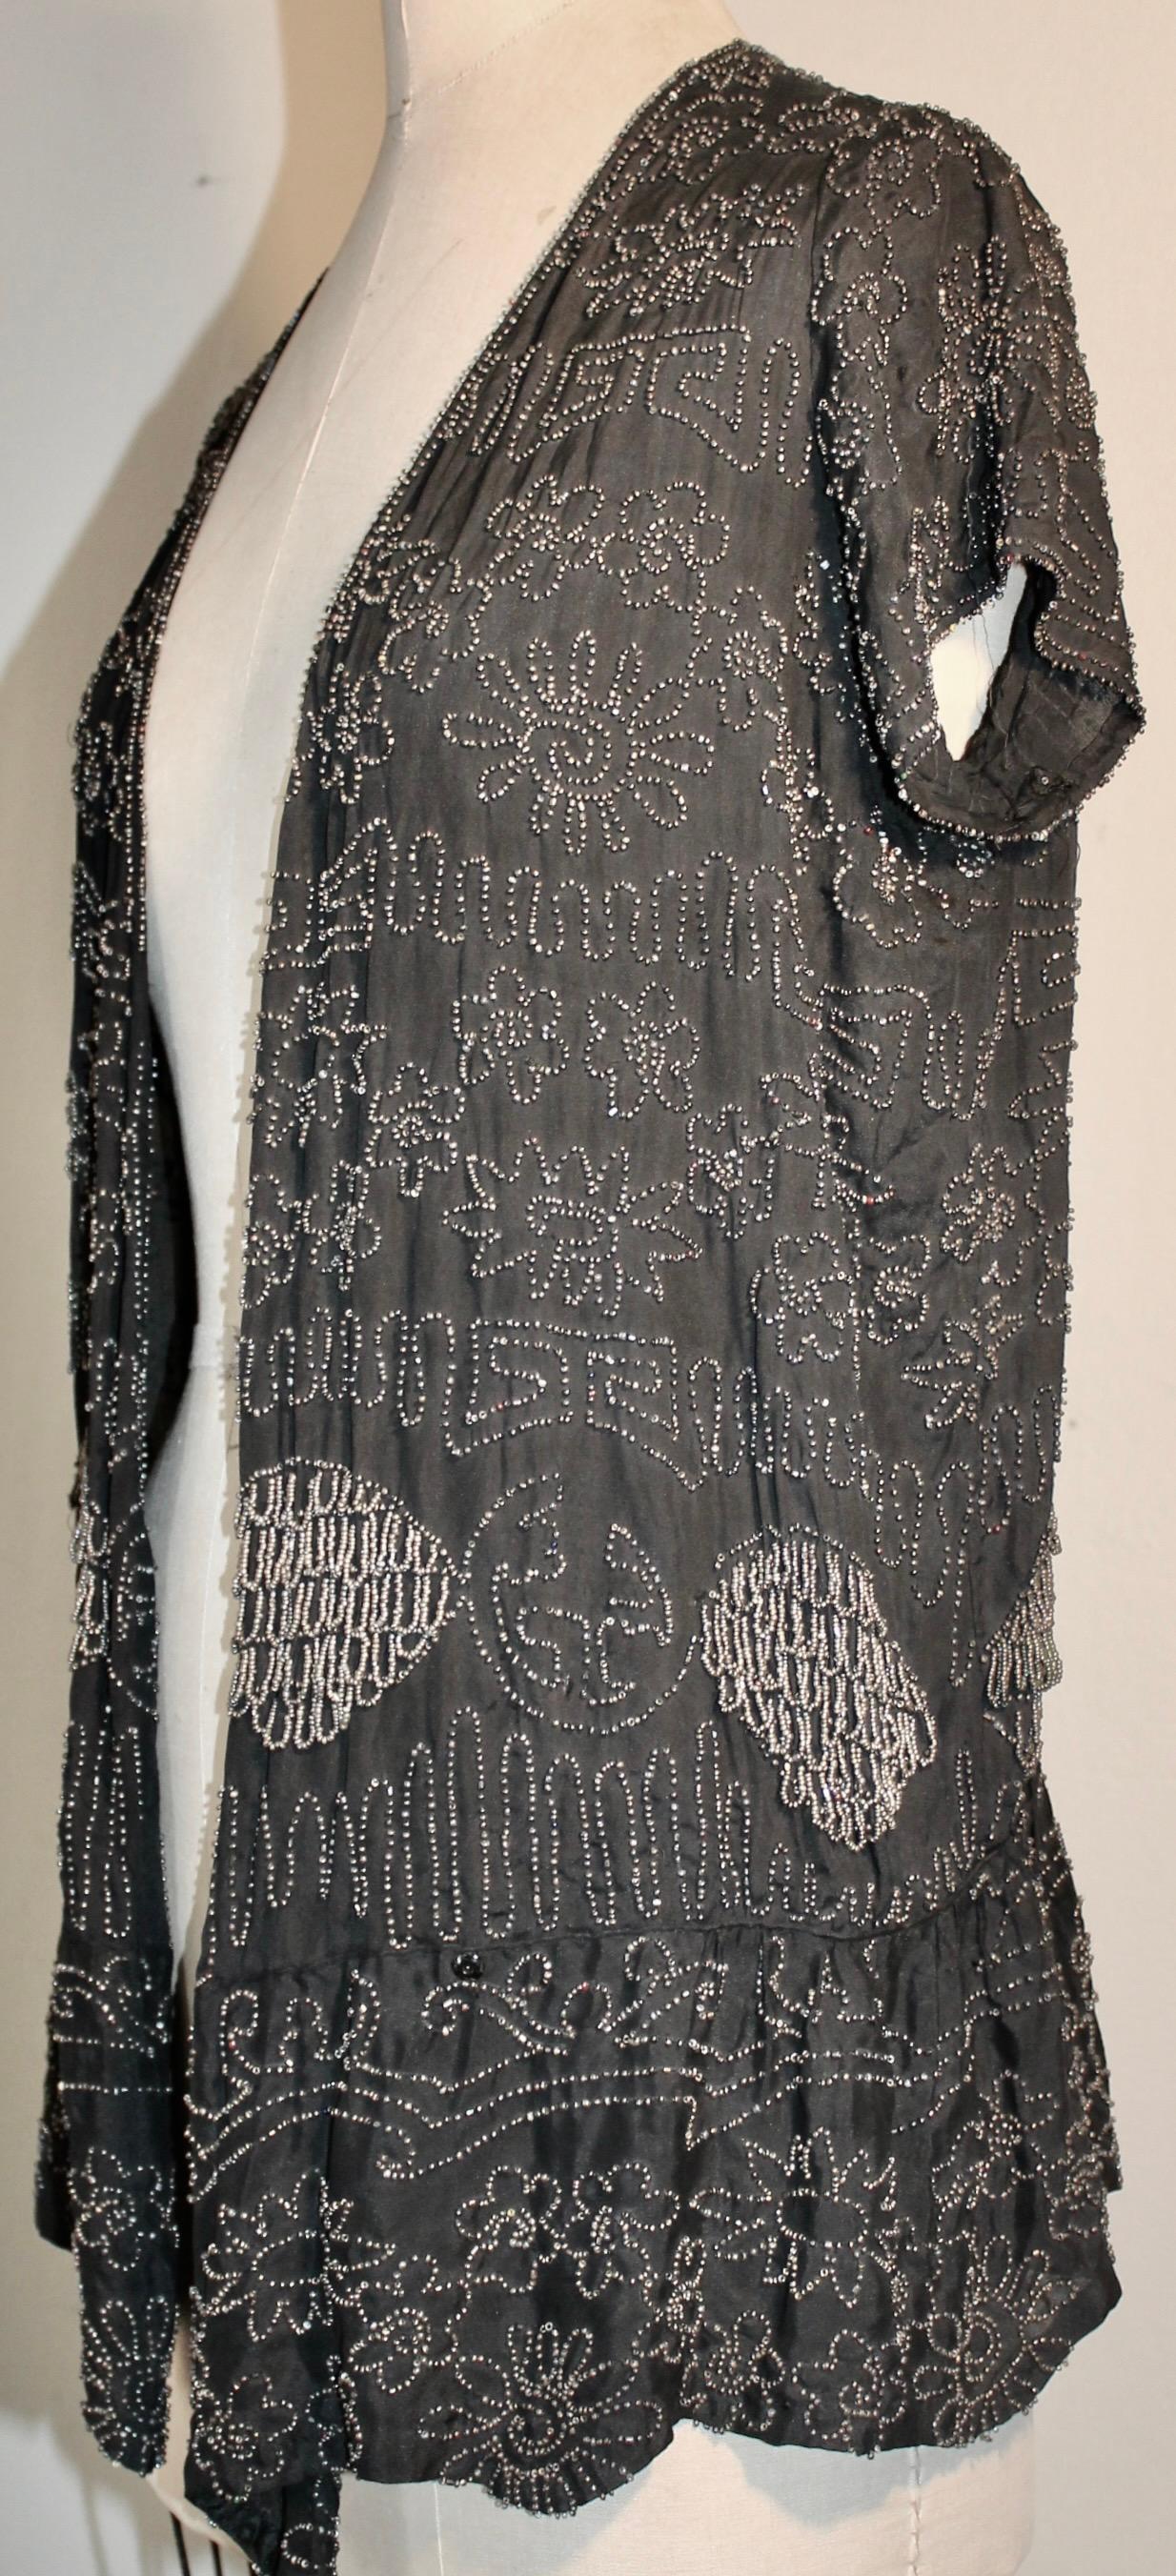 Embroidered mostly silver beads in a Chinoise design, on a semi transparent black ground. 